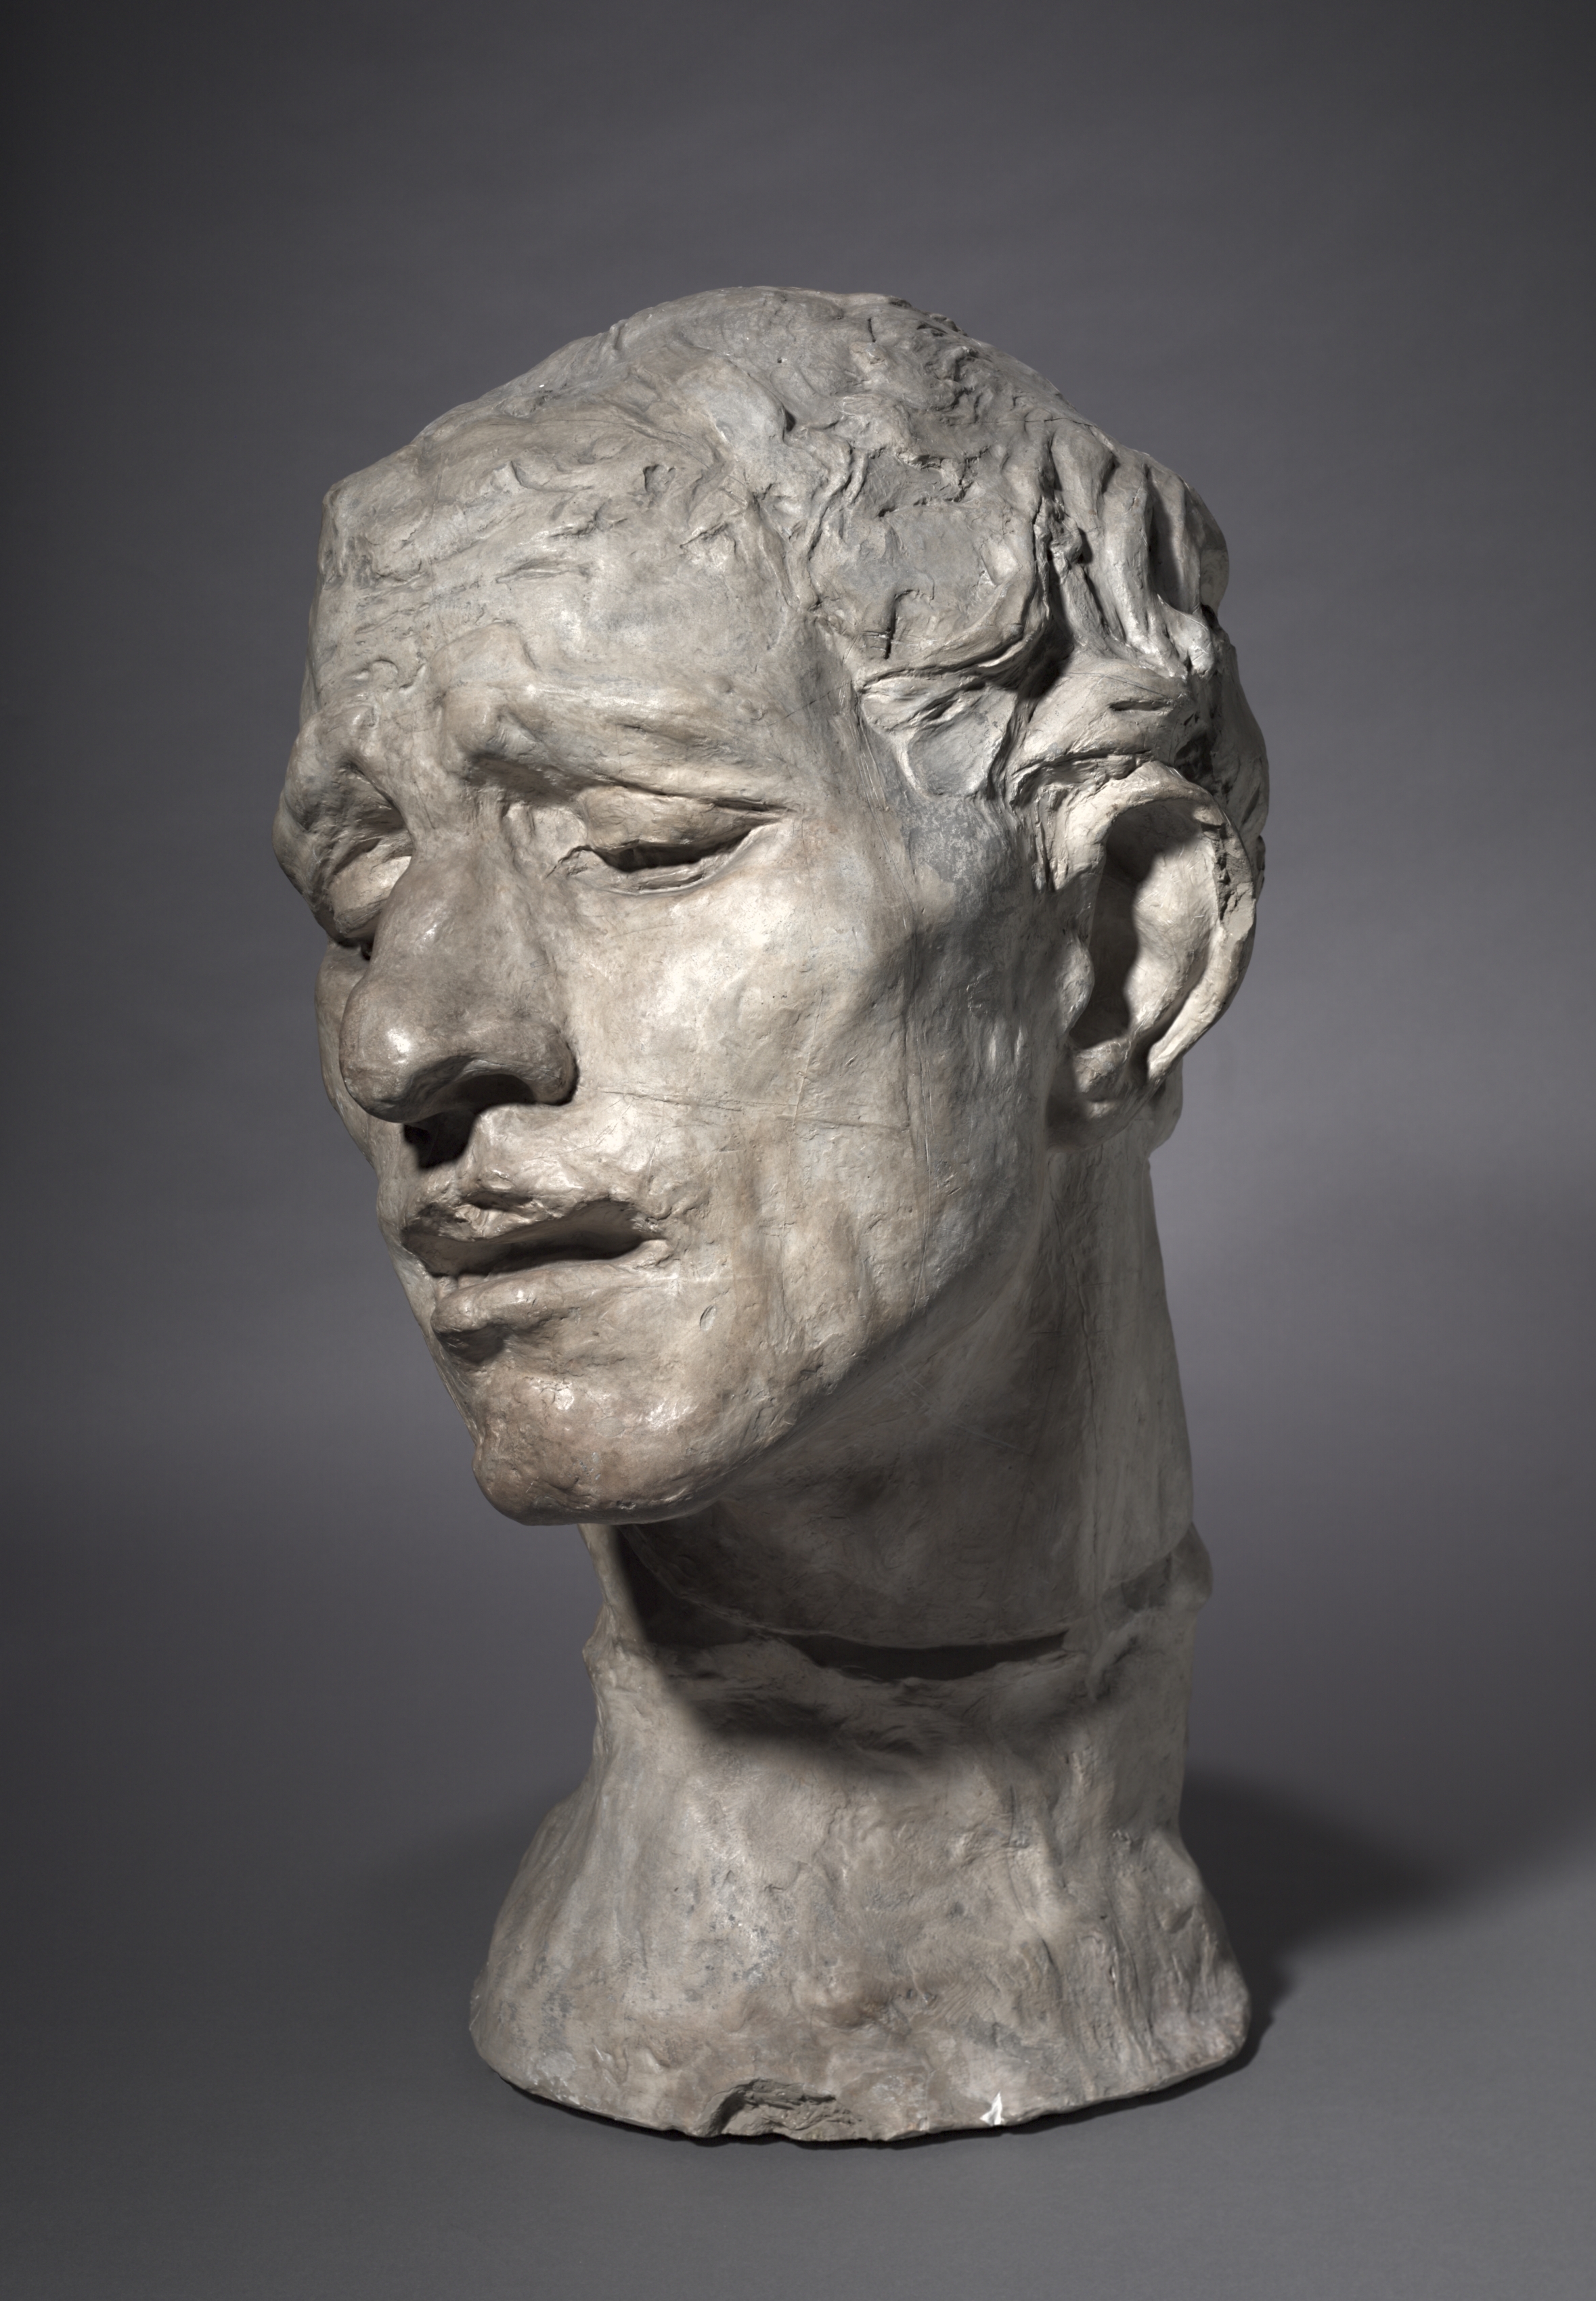 Heroic Head of Pierre de Wissant, One of the Burghers of Calais